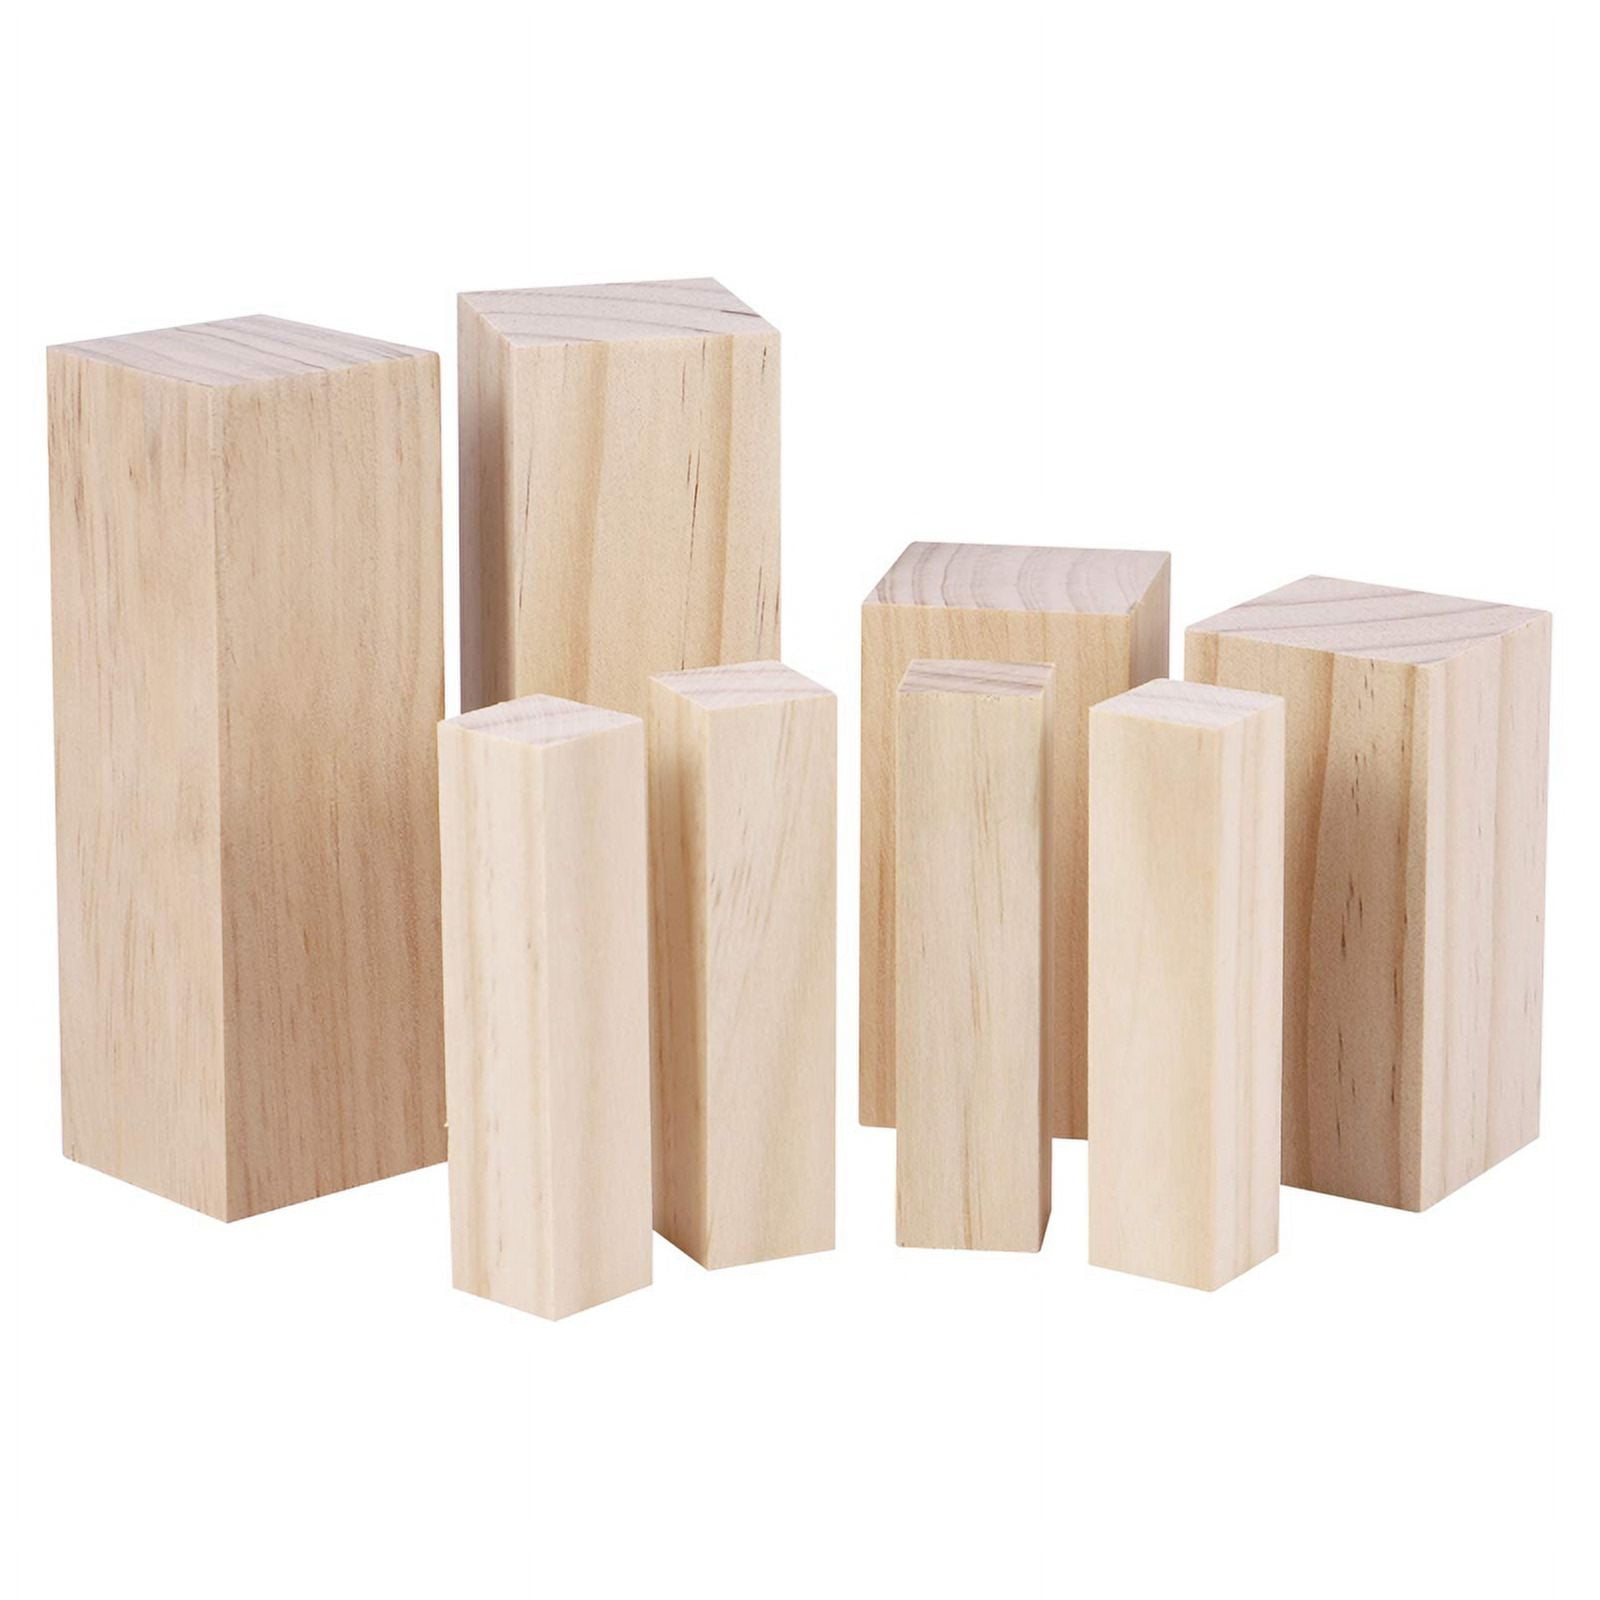  CYEAH 8 PCS Basswood Carving Block, 5 x 2 x 2 Inch Basswood for  Wood Carving, Whittling Wood Carving Wood Blocks, Unfinished balsa Wood  Blocks for Beginner or Expert Carvers and Whittling